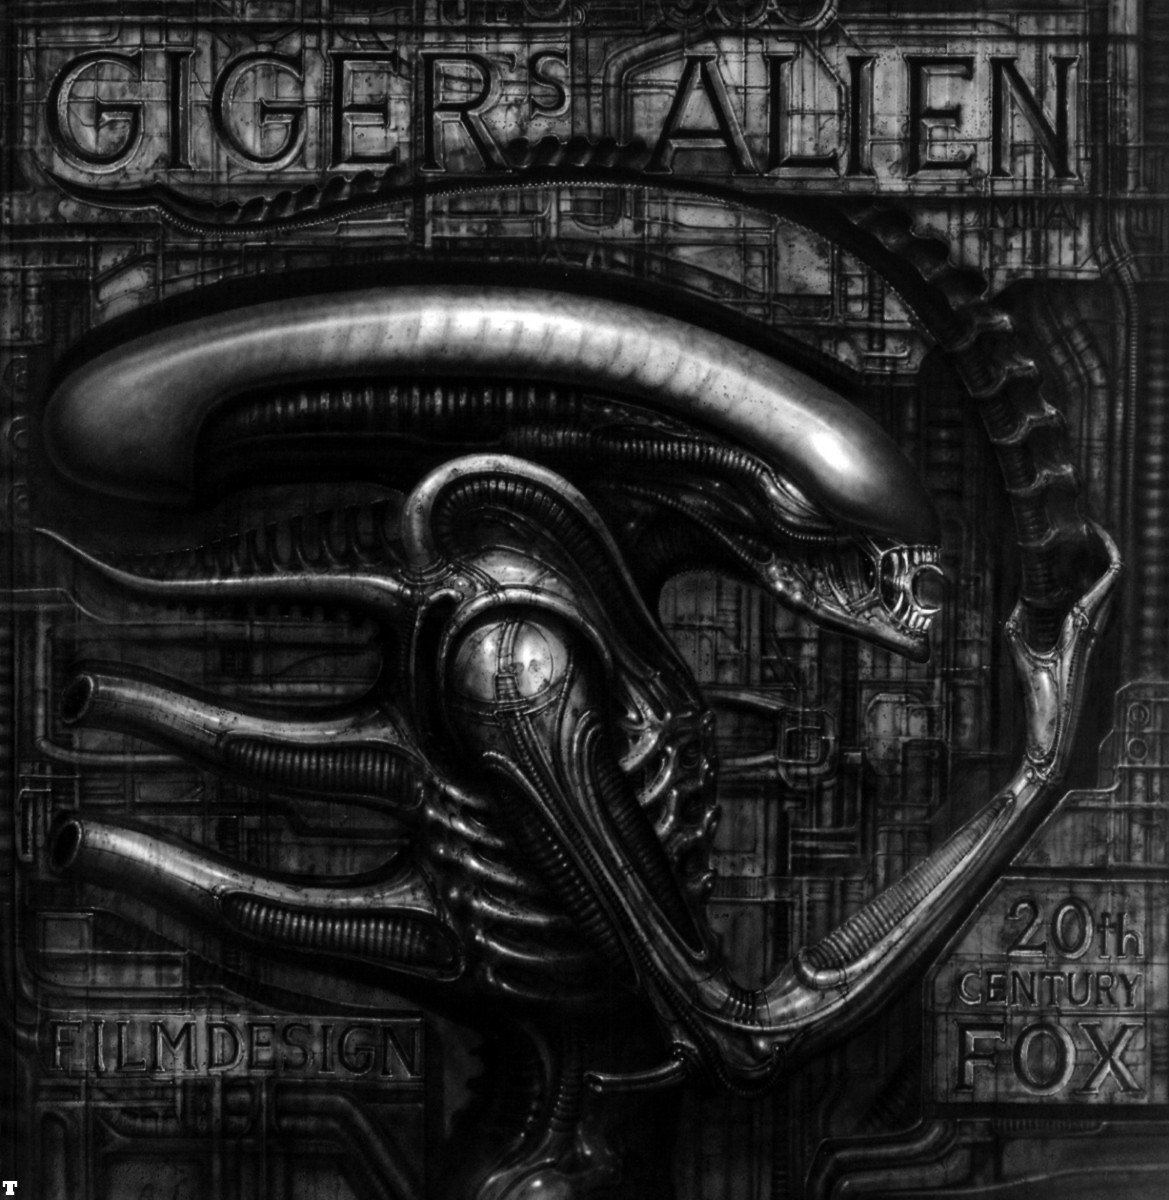 The Art of Giger – Part I